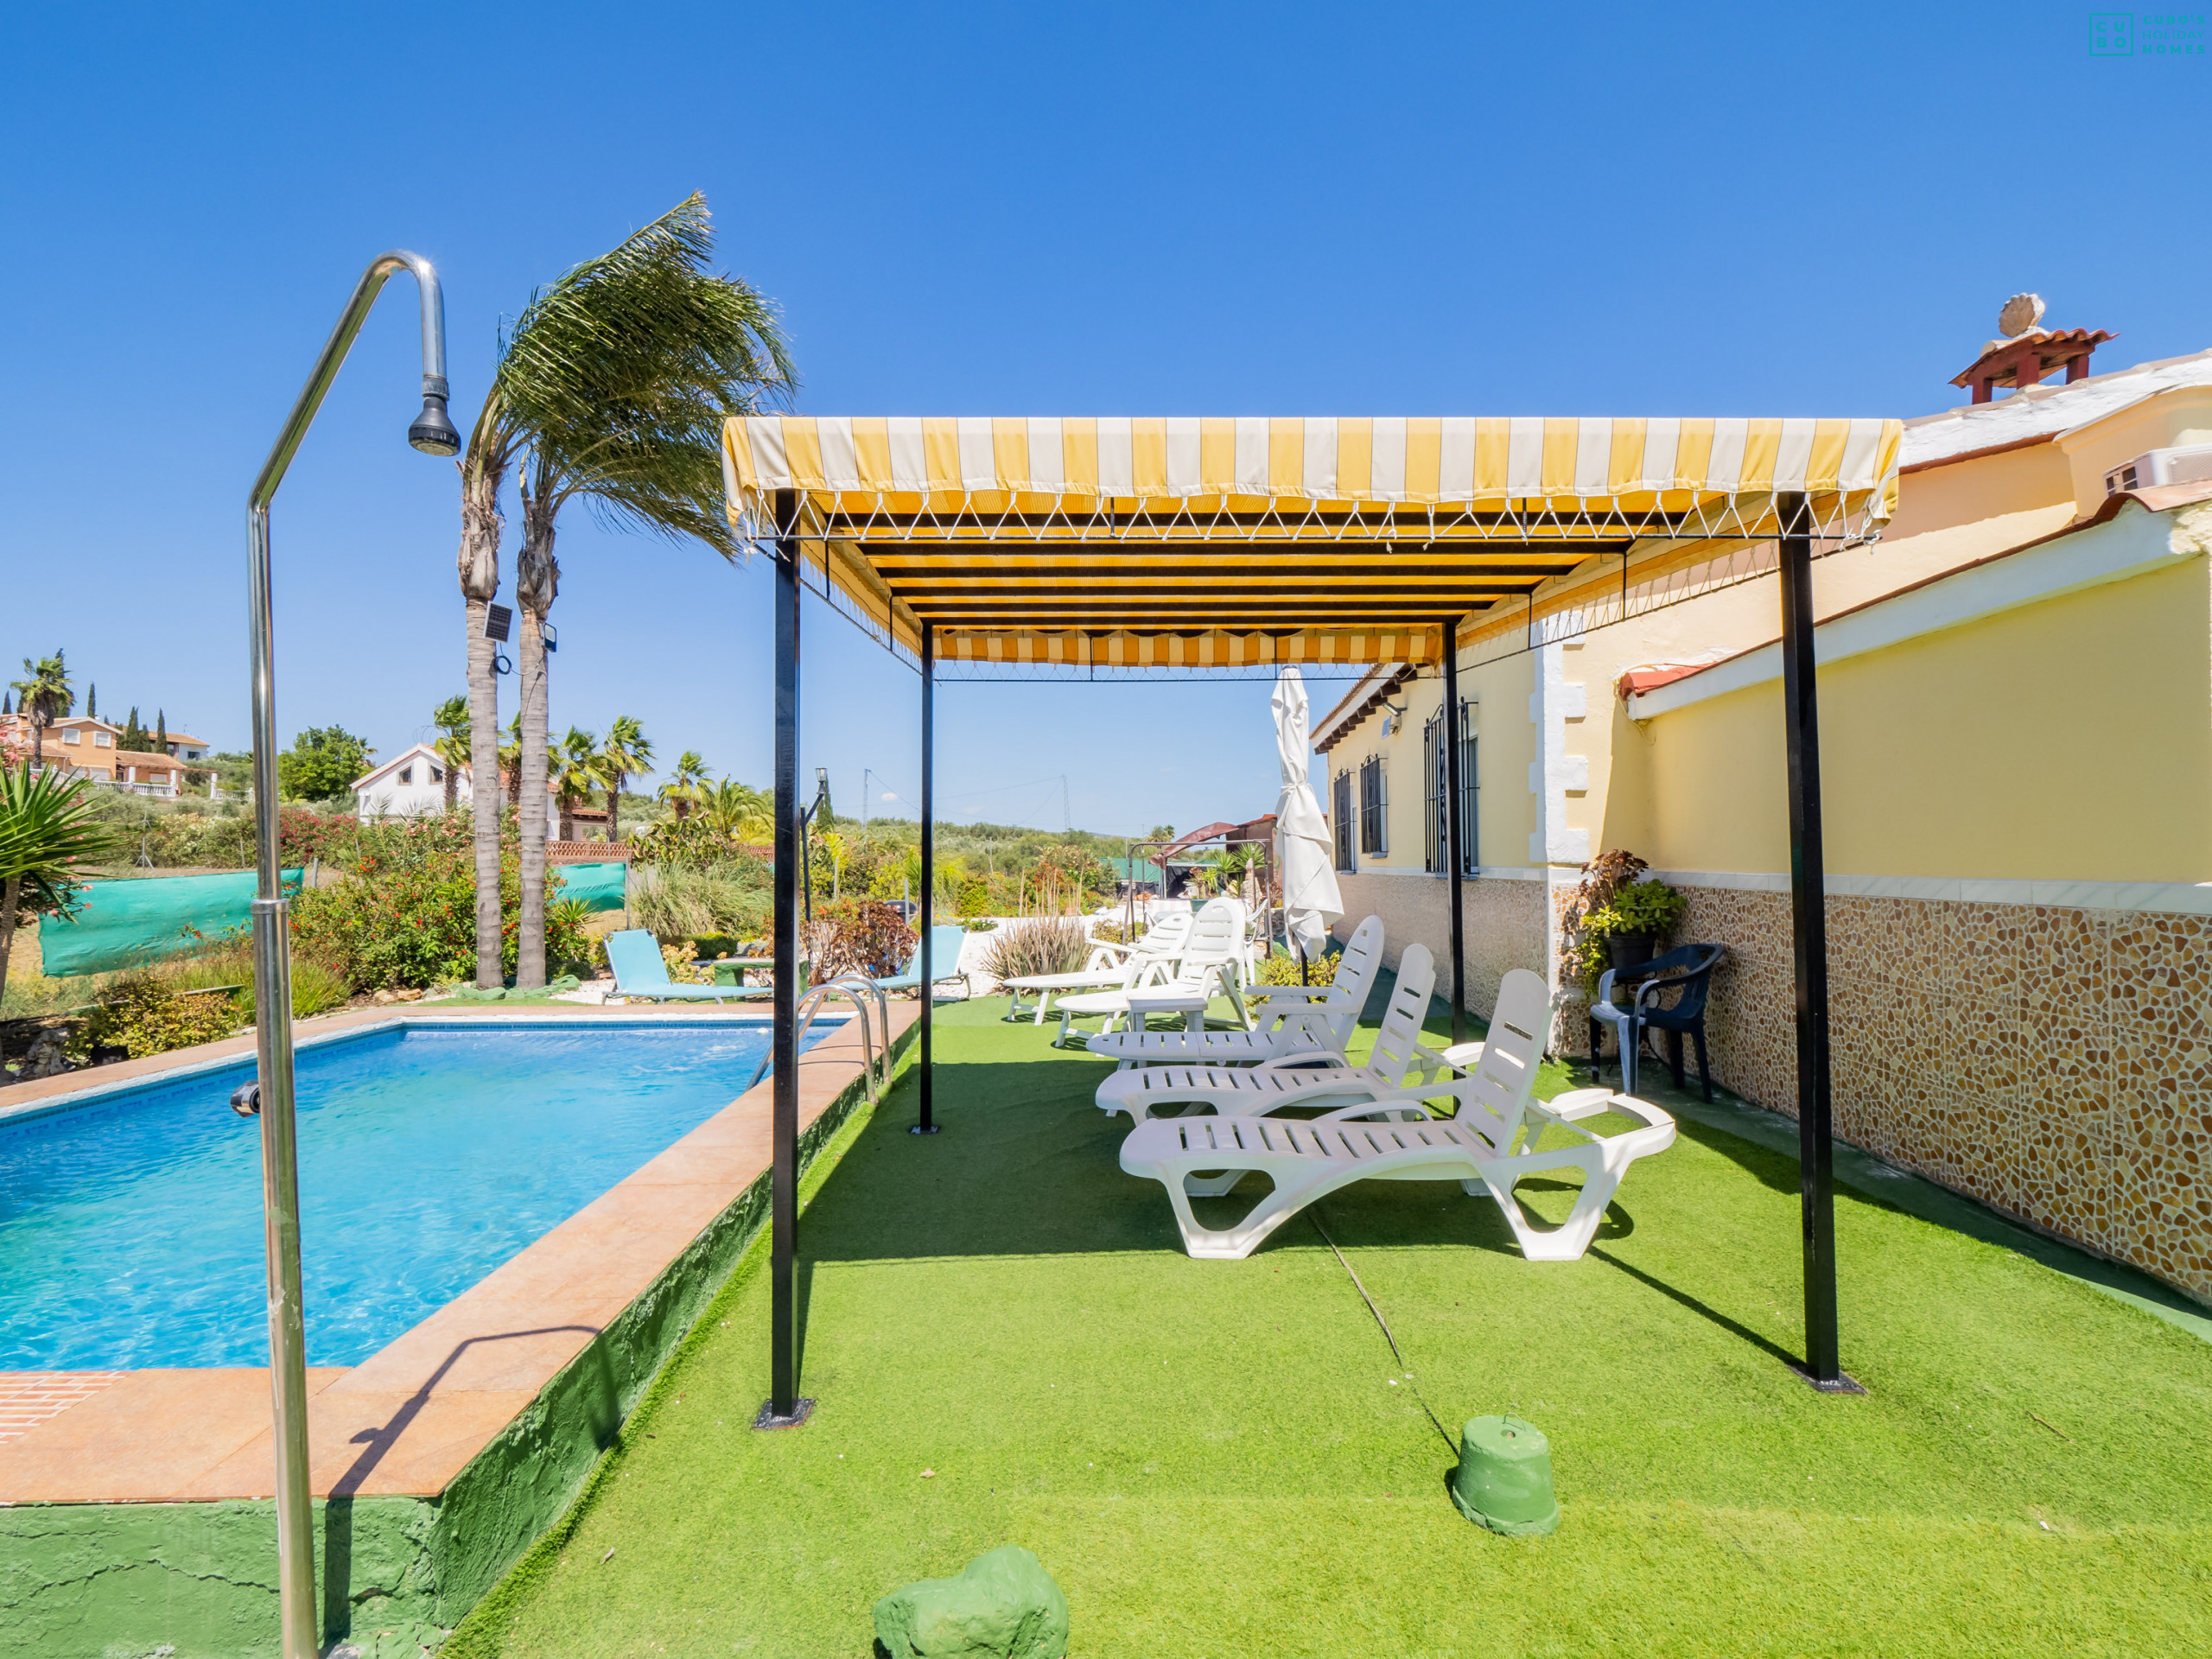 Pool and outdoor area of the accommodation